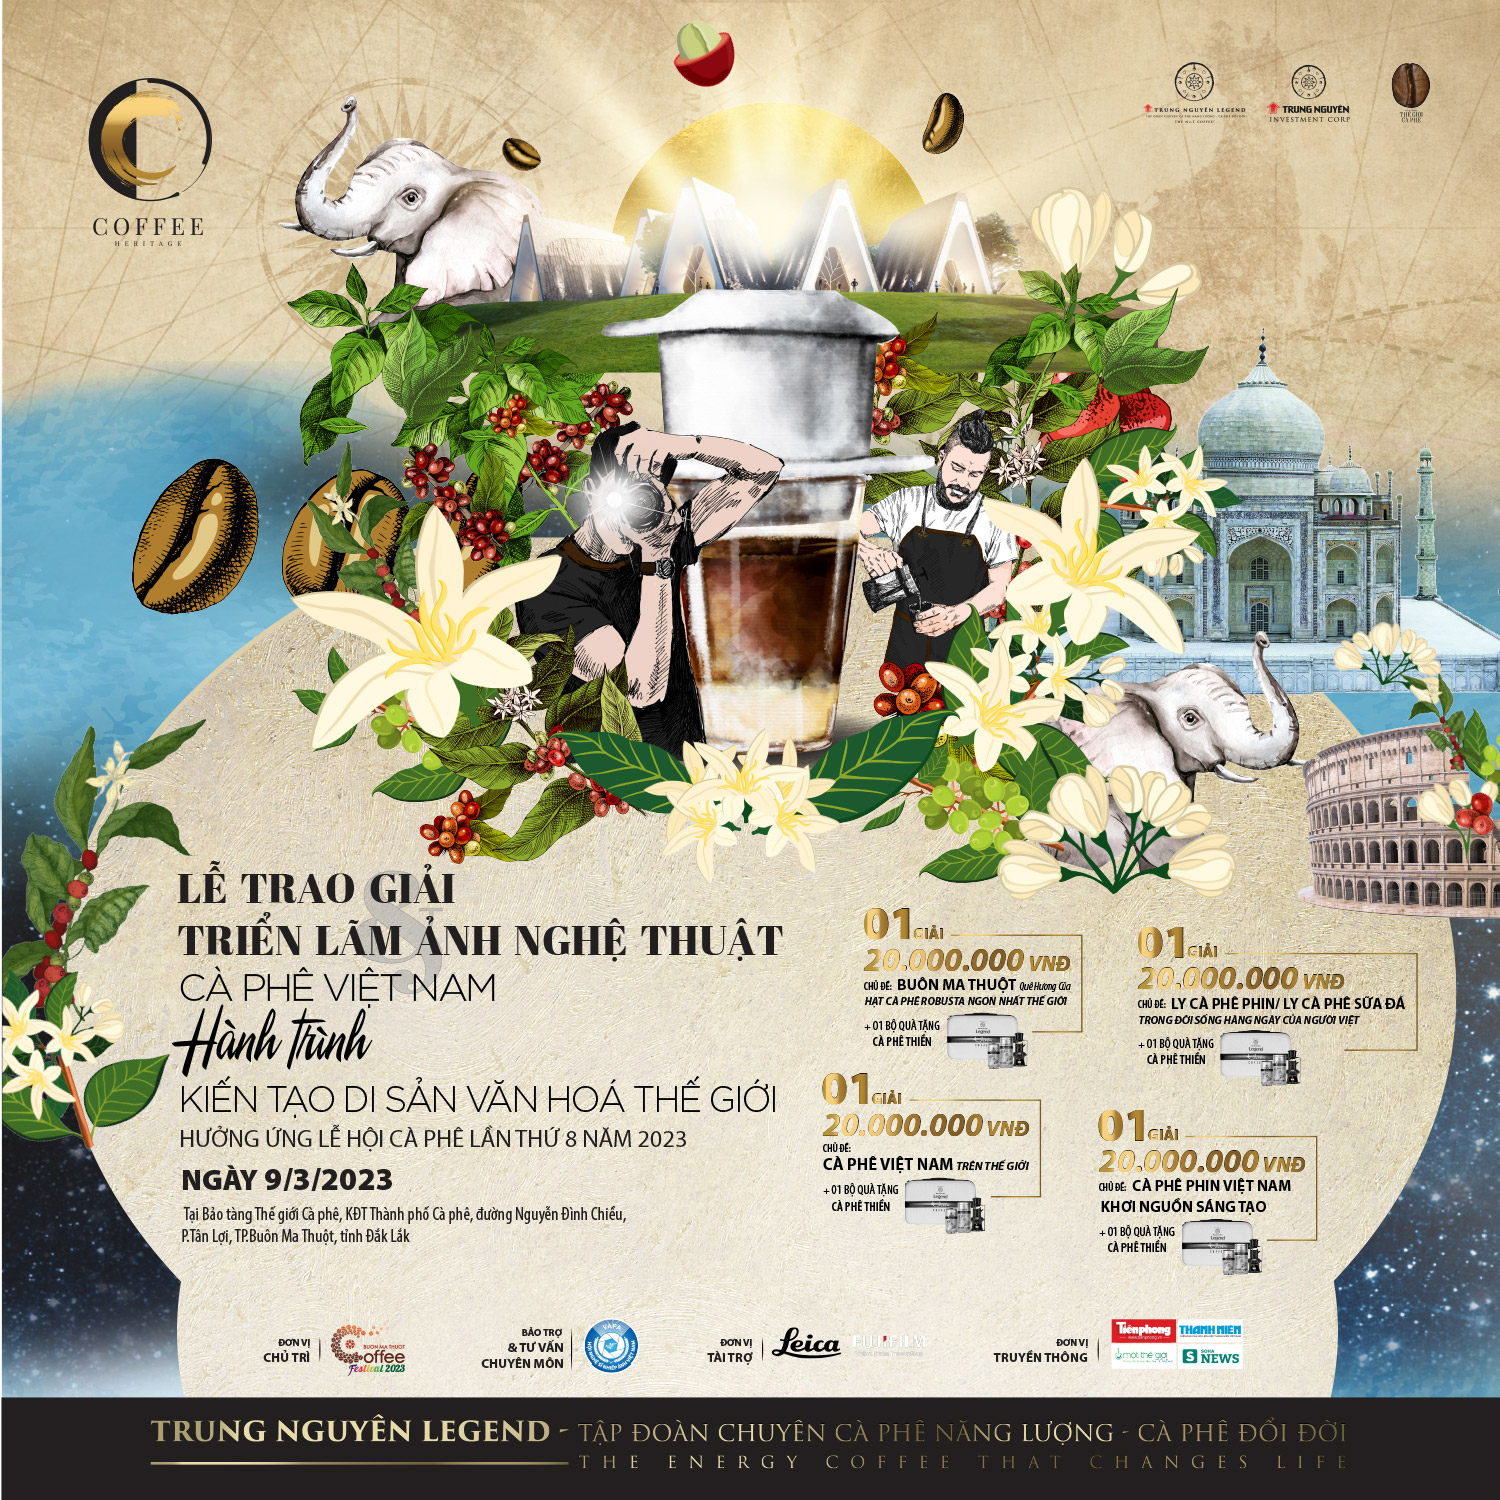 The art photography competition and exhibition "Vietnamese Coffee - A Journey of Creating World Cultural Heritage" is co-organized by the World Coffee Museum in response to the 8th Buôn Ma Thuột Coffee Festival.